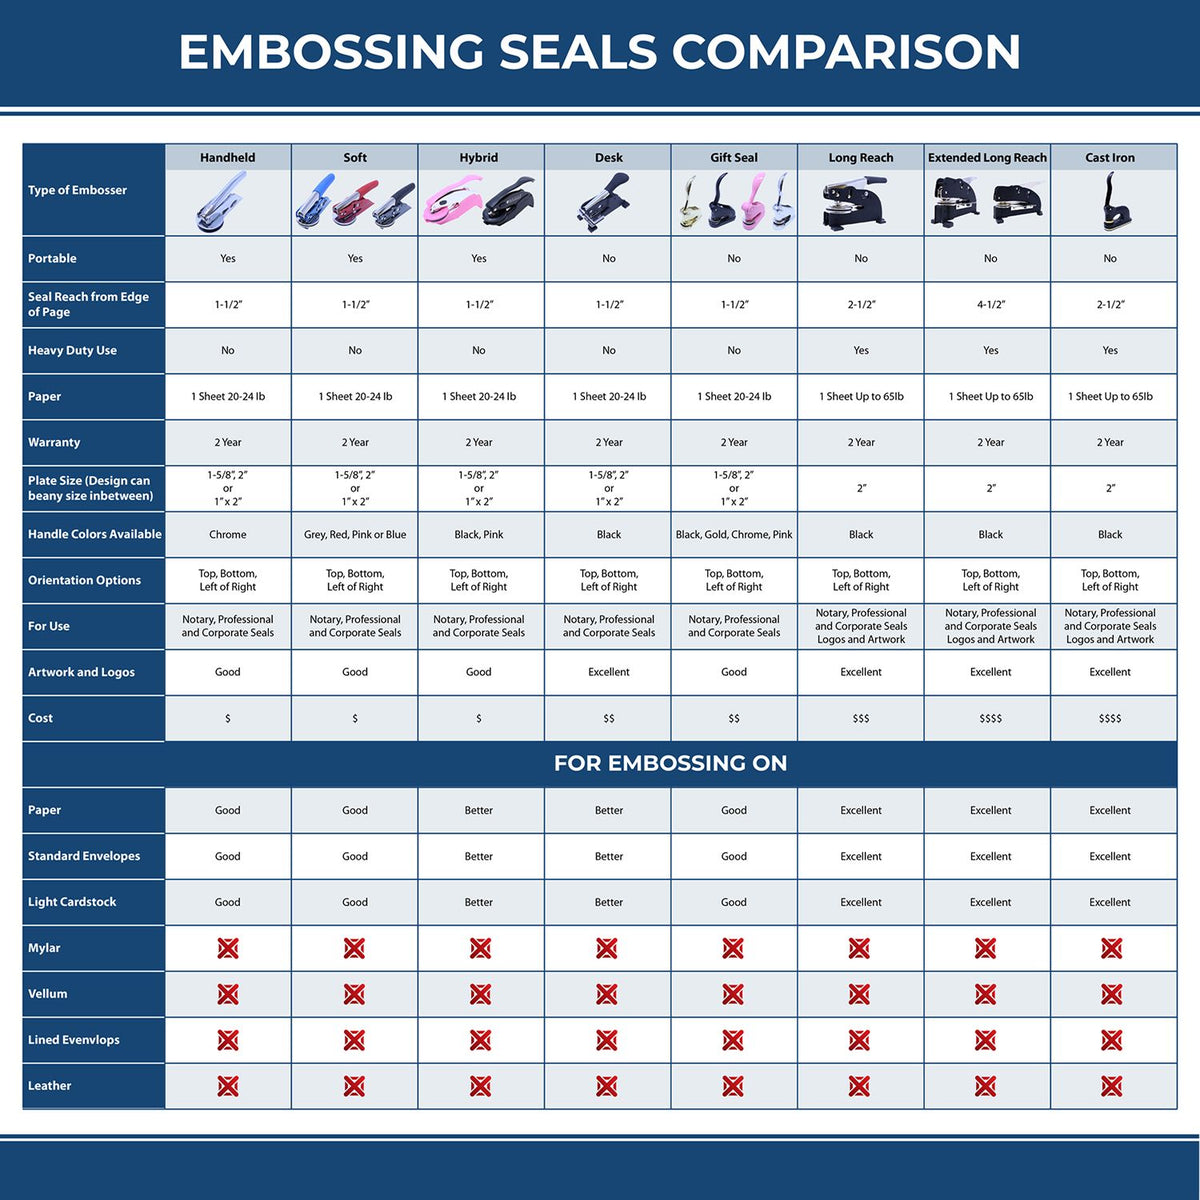 A comparison chart for the different types of mount models available for the Heavy Duty Cast Iron New Mexico Architect Embosser.